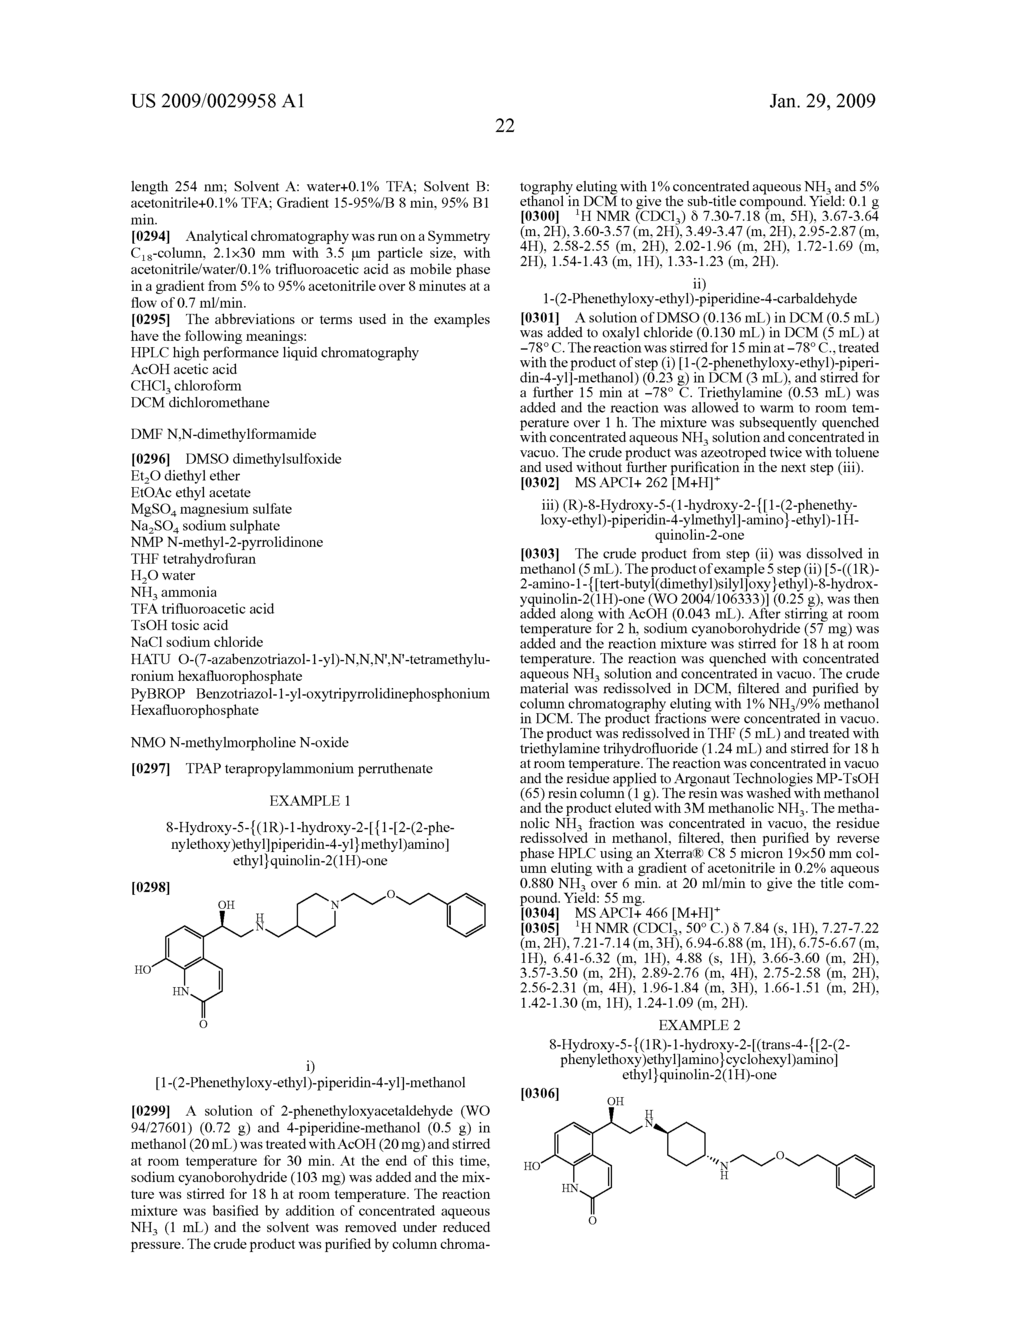 PHENETHANOLAMINE DERIVATIVES AS BETA2 ADRENORECEPTOR AGONISTS - diagram, schematic, and image 23